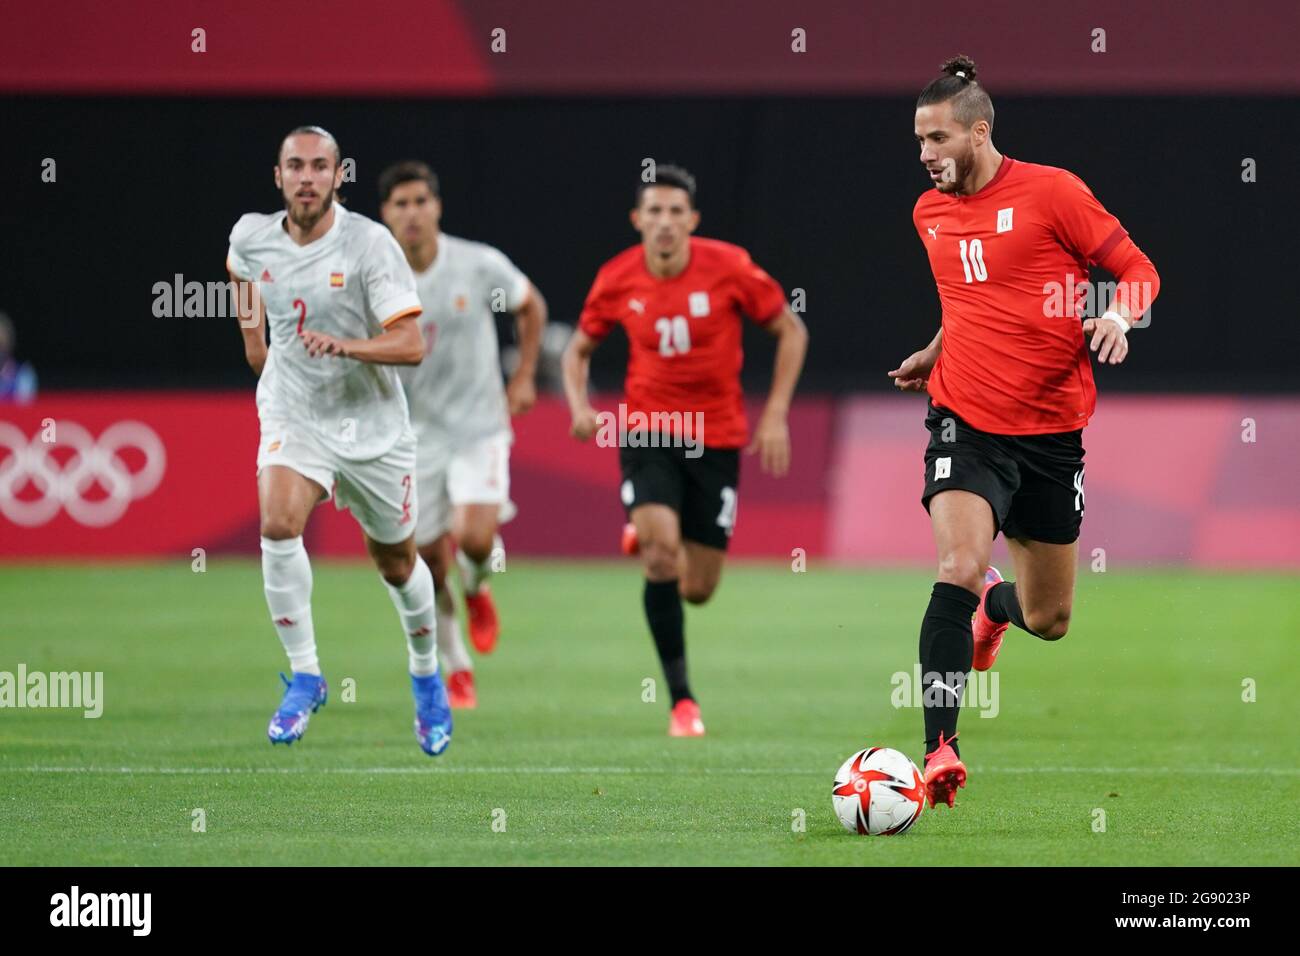 Sapporo, Japan. 22nd July, 2021. Ramadan Sobhi (10 Egypt) controls the ball (action) during the Men's Olympic Football Tournament Tokyo 2020 match between Egypt and Spain at Sapporo Dome in Sapporo, Japan. Credit: SPP Sport Press Photo. /Alamy Live News Stock Photo